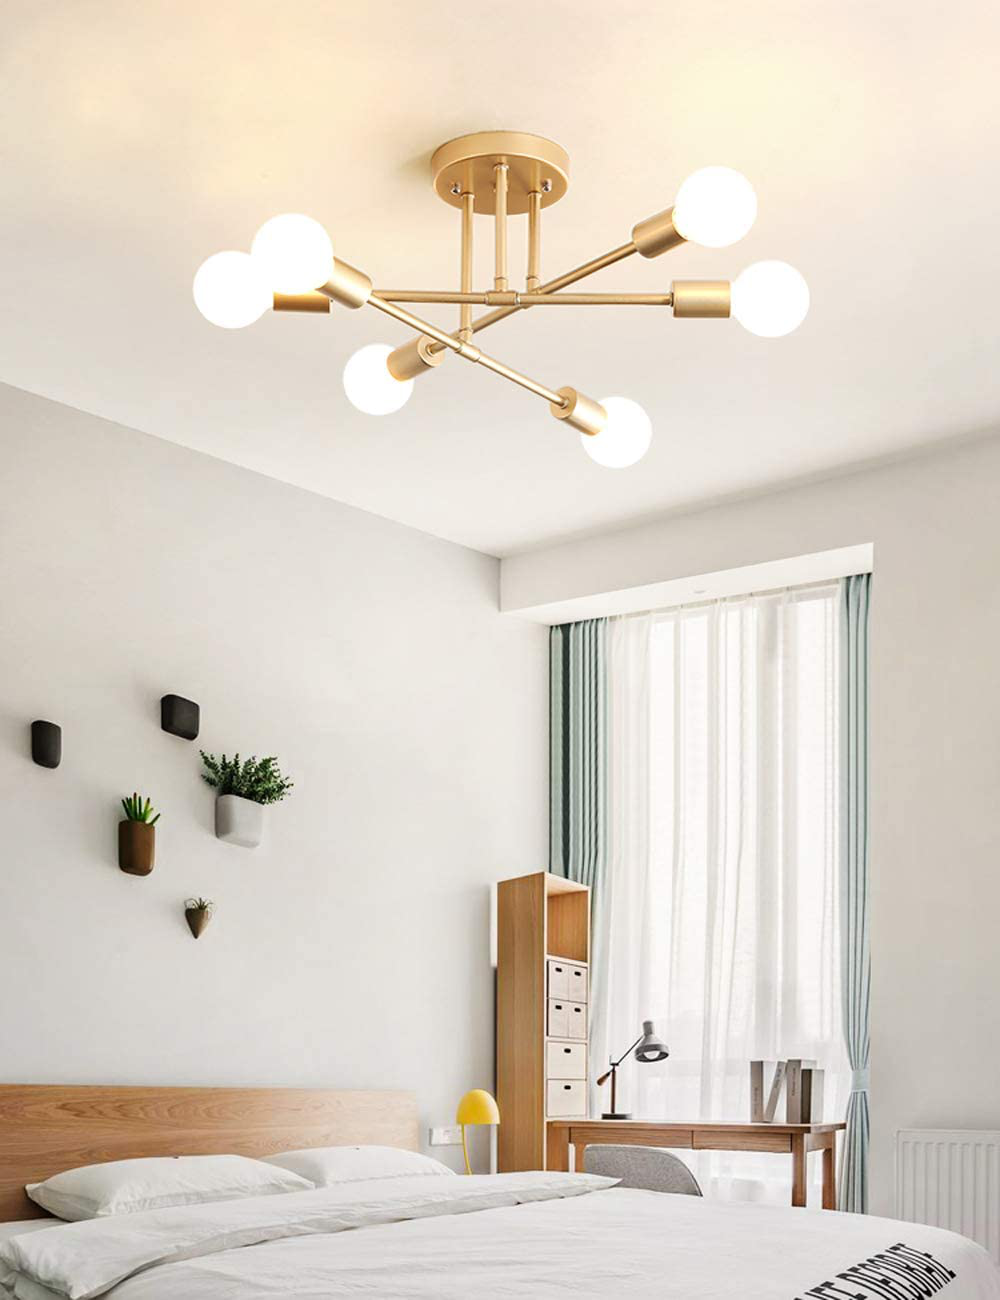 Less Flashy Bedroom Ceiling Lights